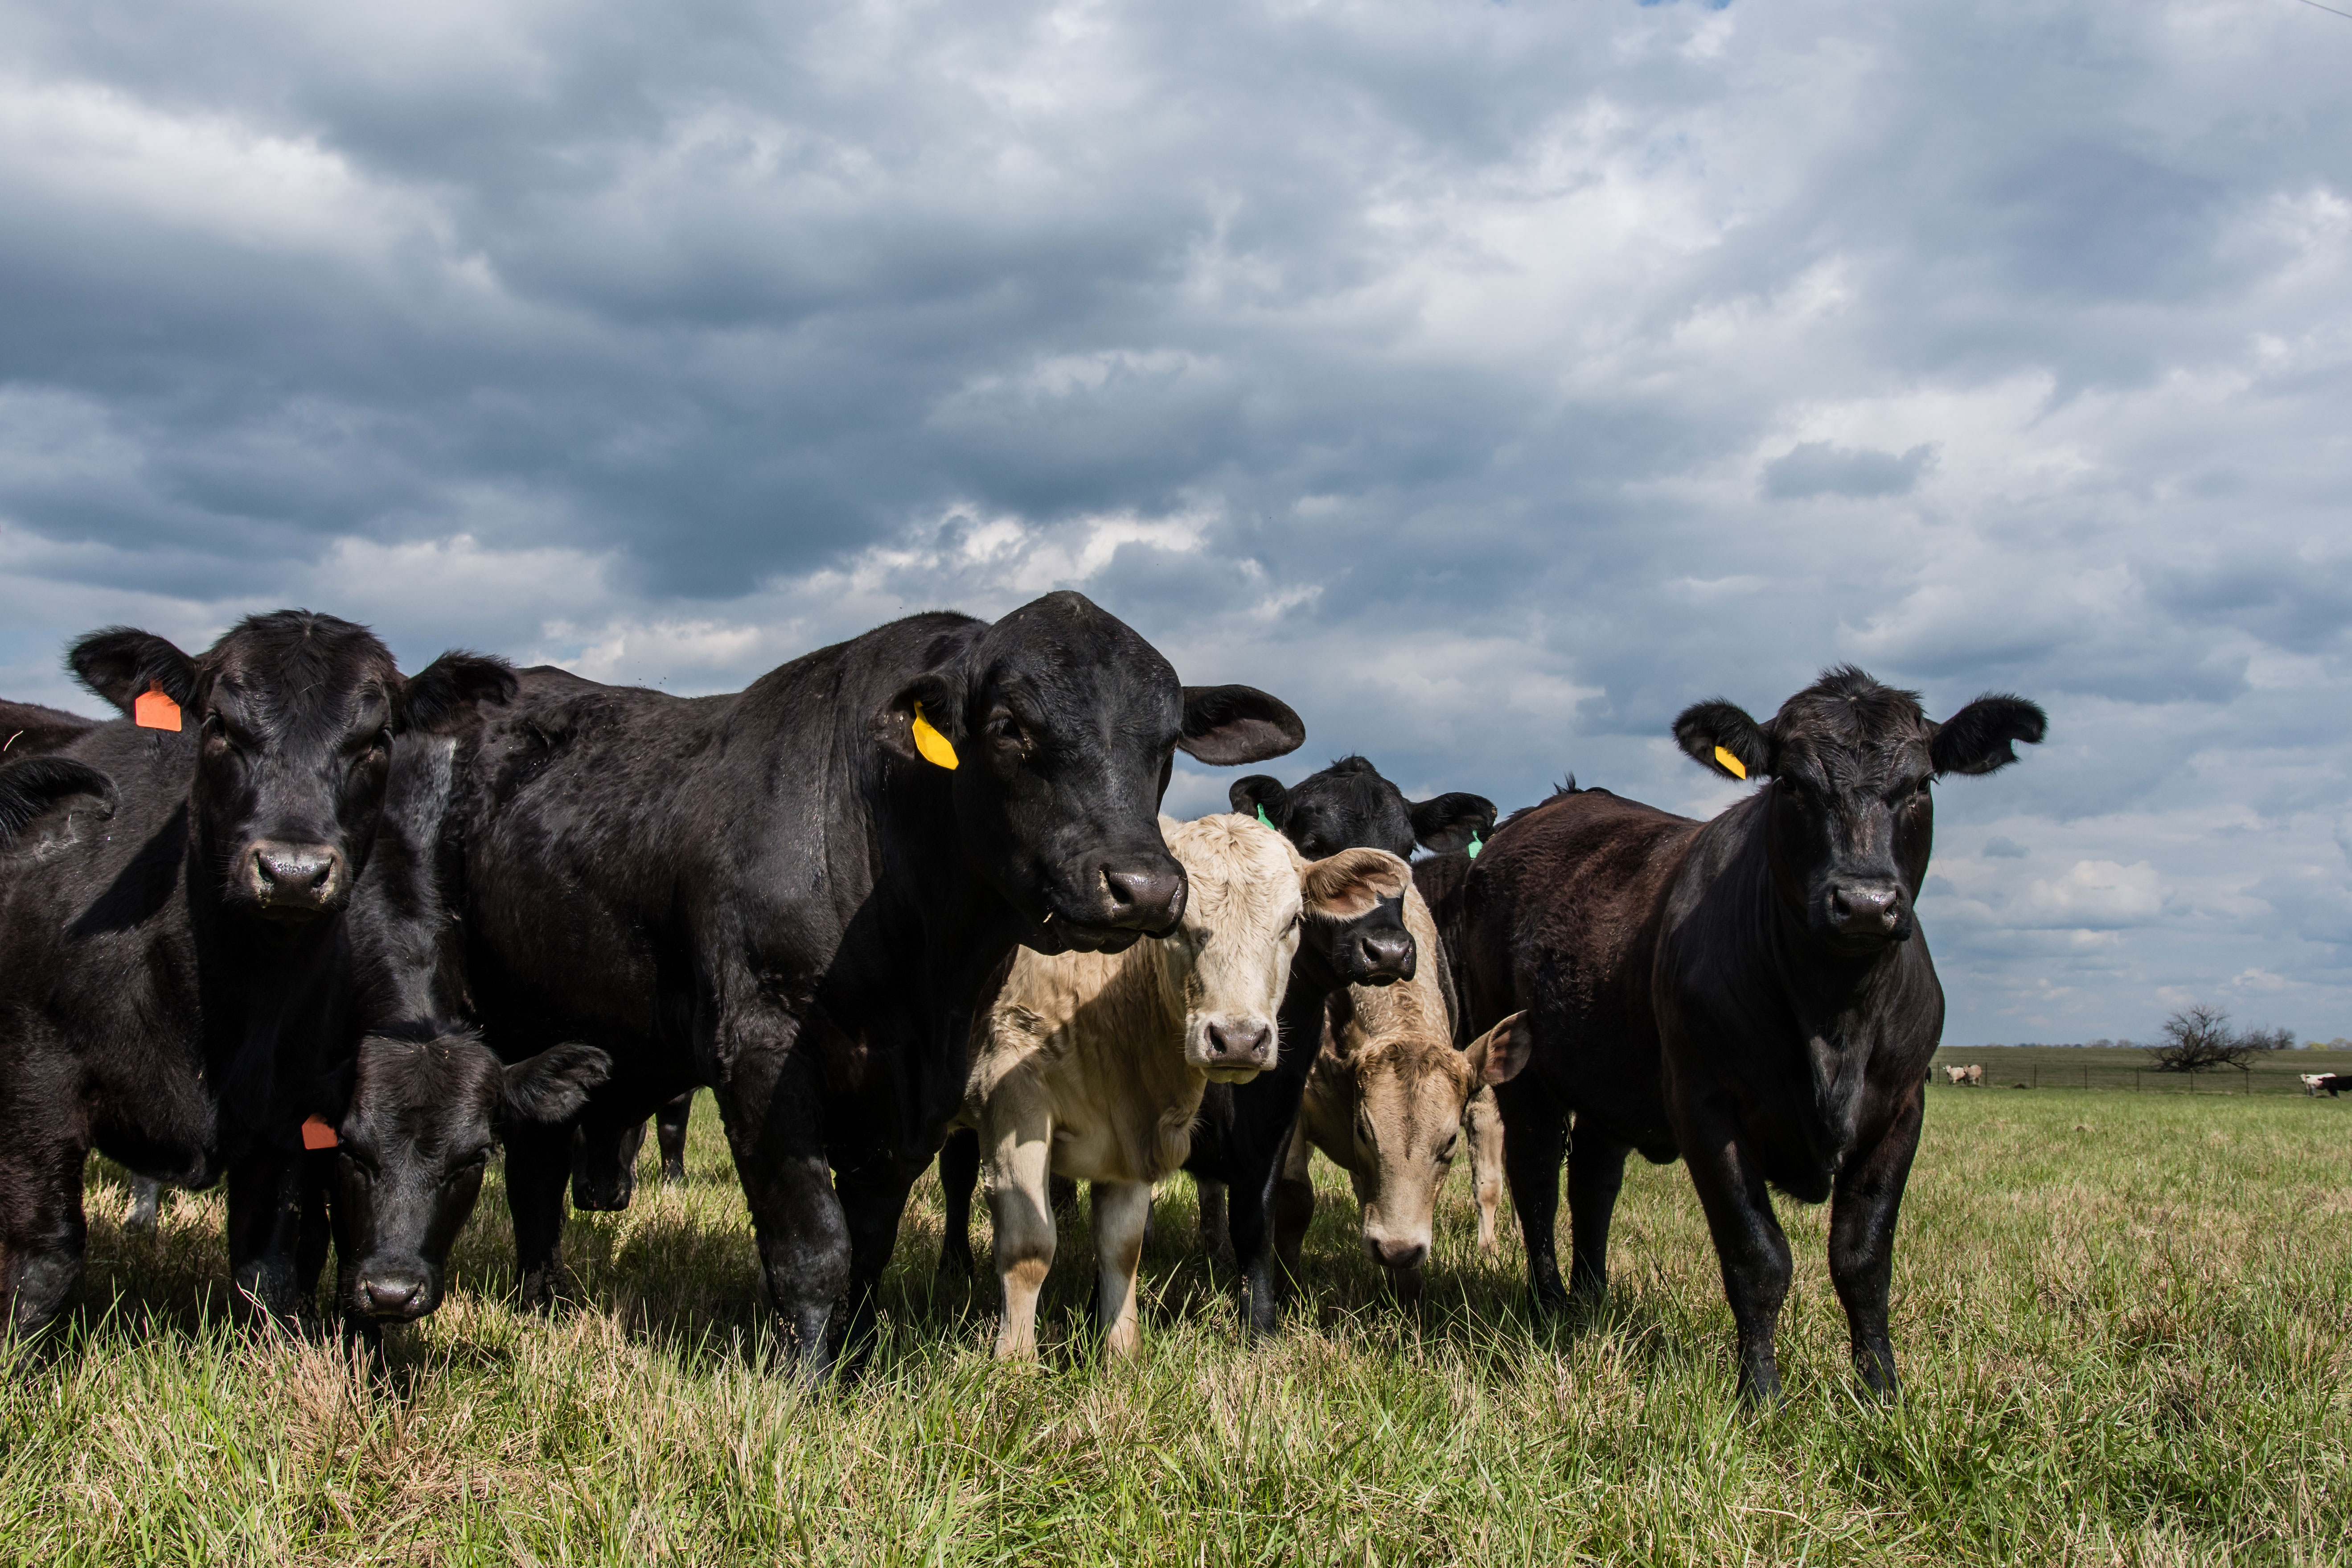 Black Angus bull standing with a group of Angus and Charolais crossbred heifers in a spring pasture with an overcast sky.